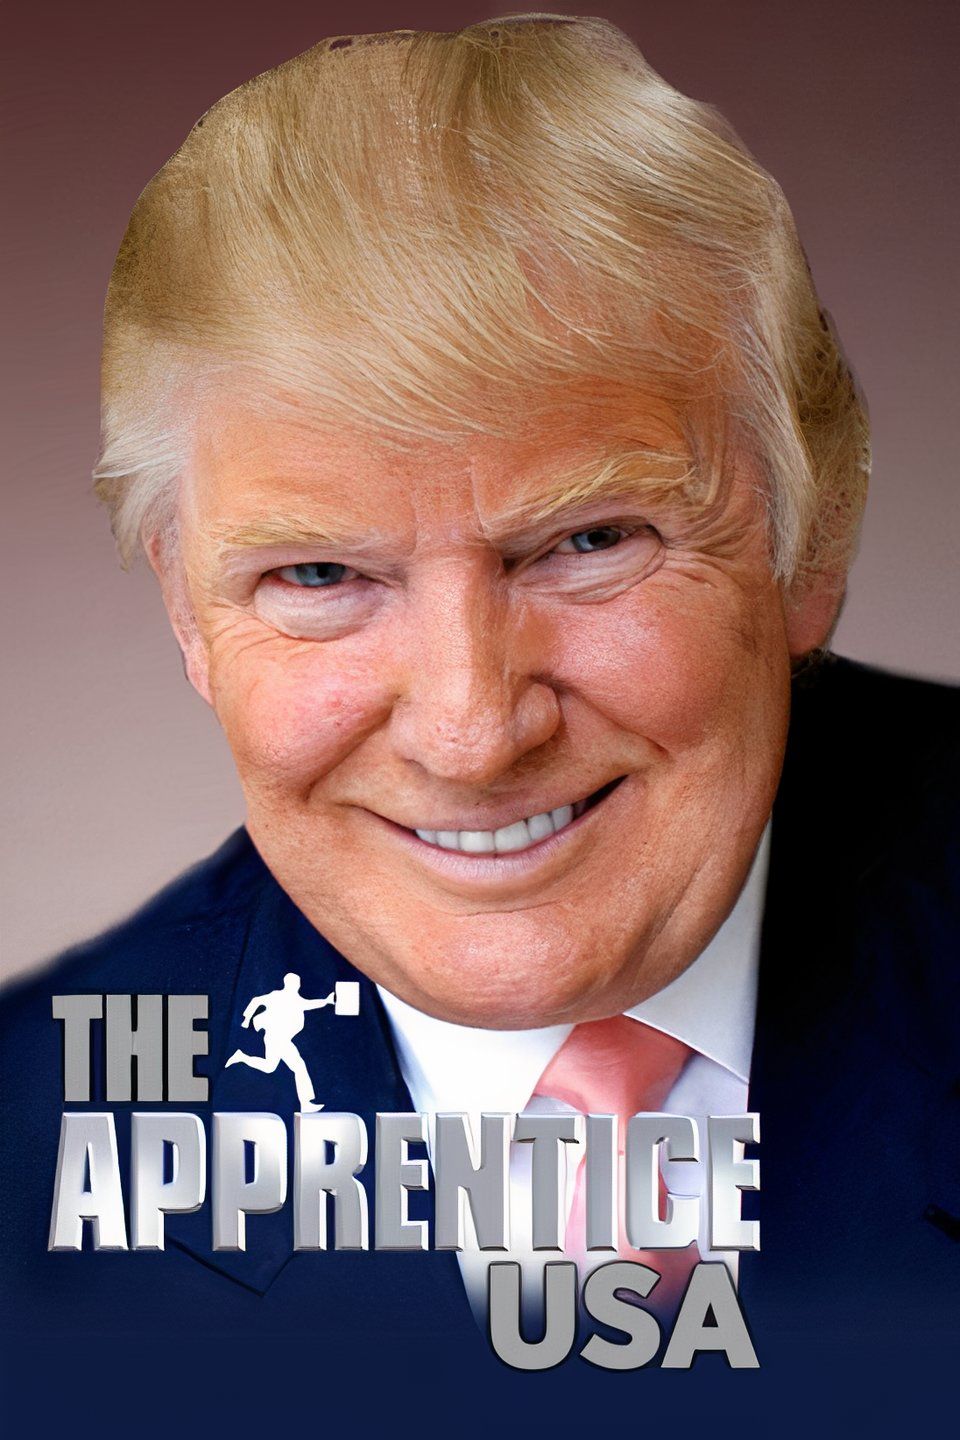 Donald Trump smiling in a poster for The Apprentice